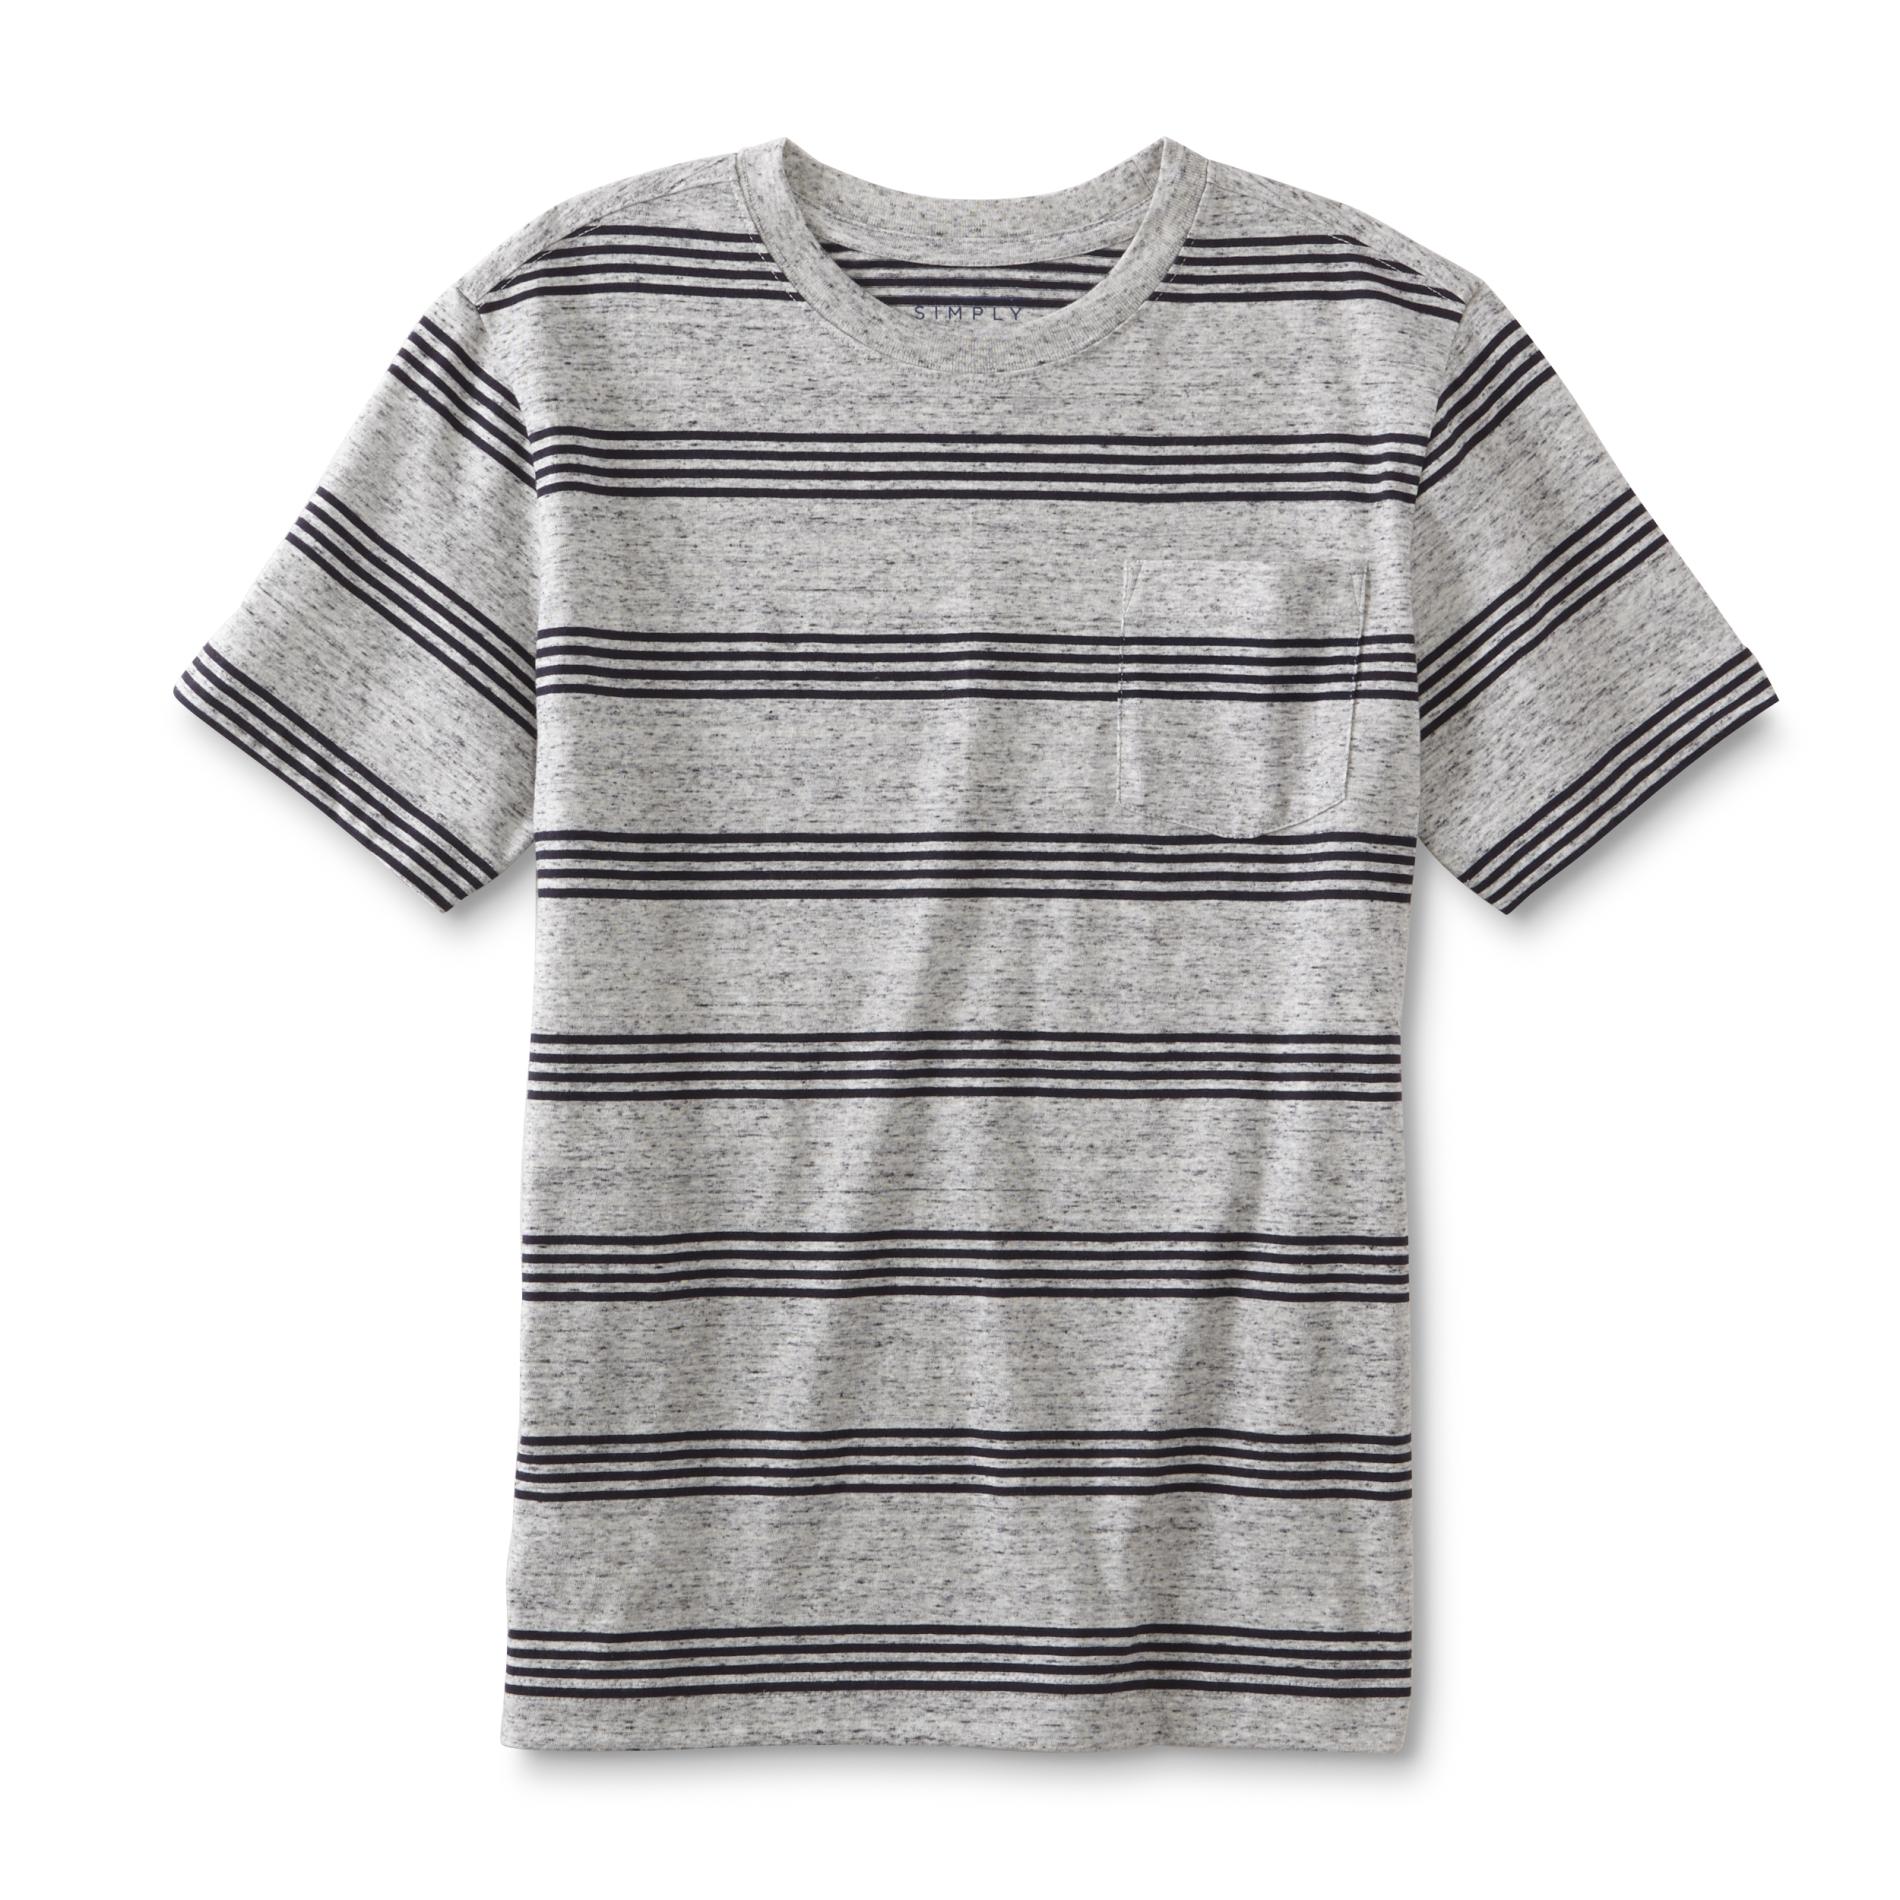 Simply Styled Boy's Pocket T-Shirt - Striped